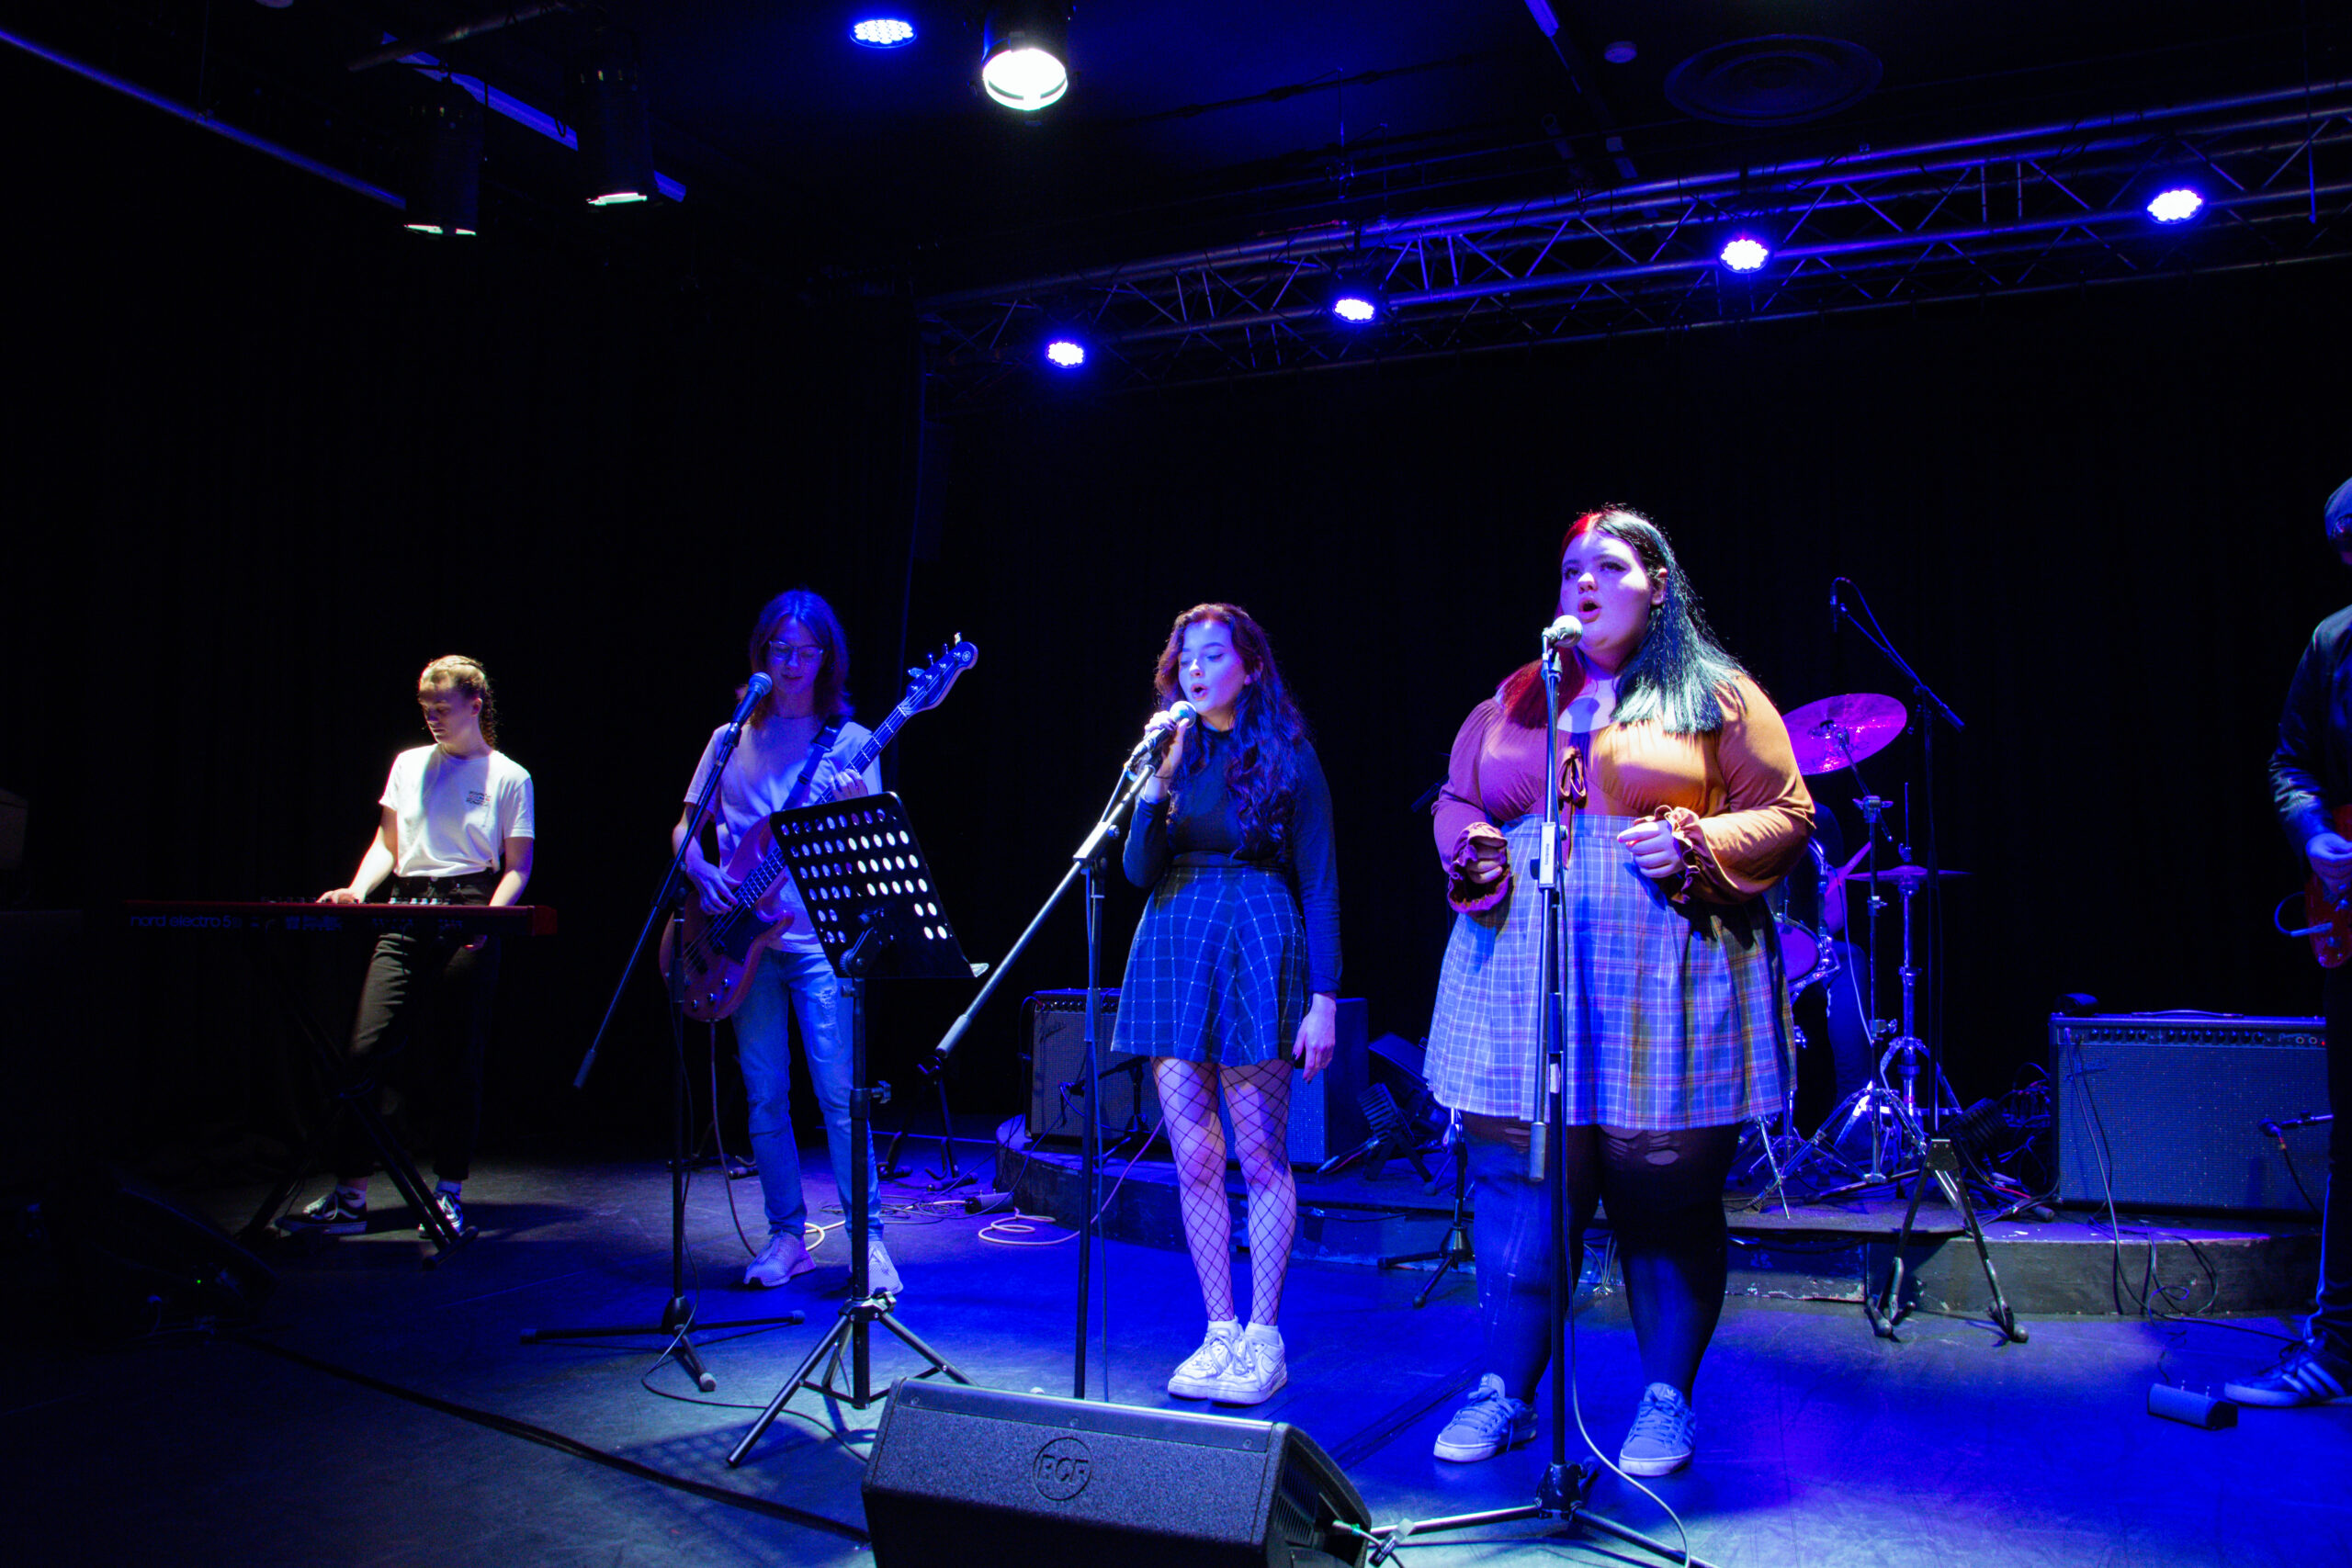 Amplified – a Music Showcase by Bradford School of Art students